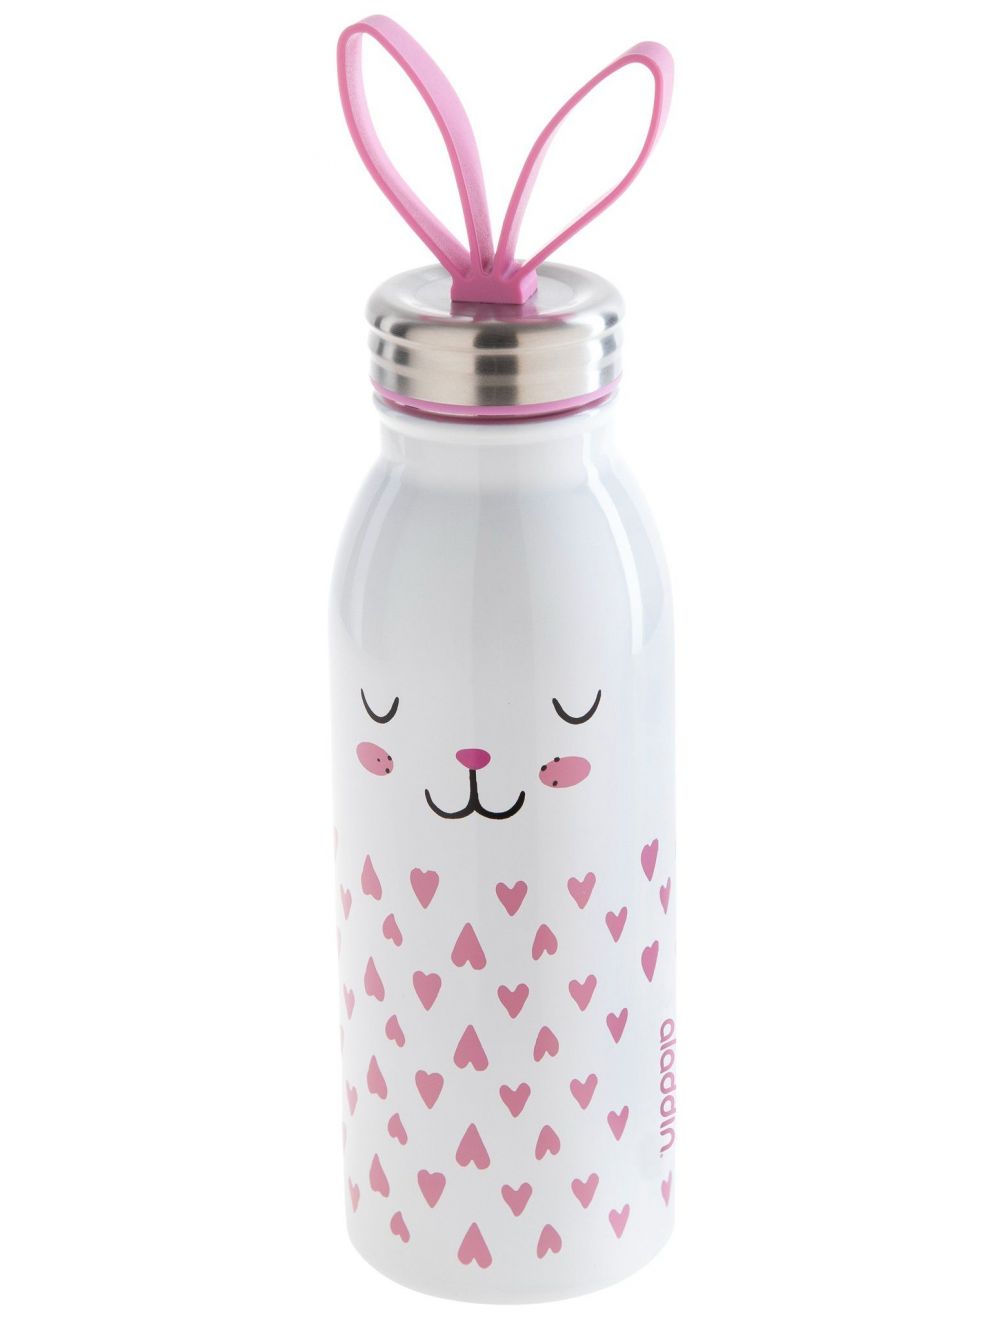 Aladdin Zoo Thermavac Stainless Steel Water Bottle 0.43L Bunny